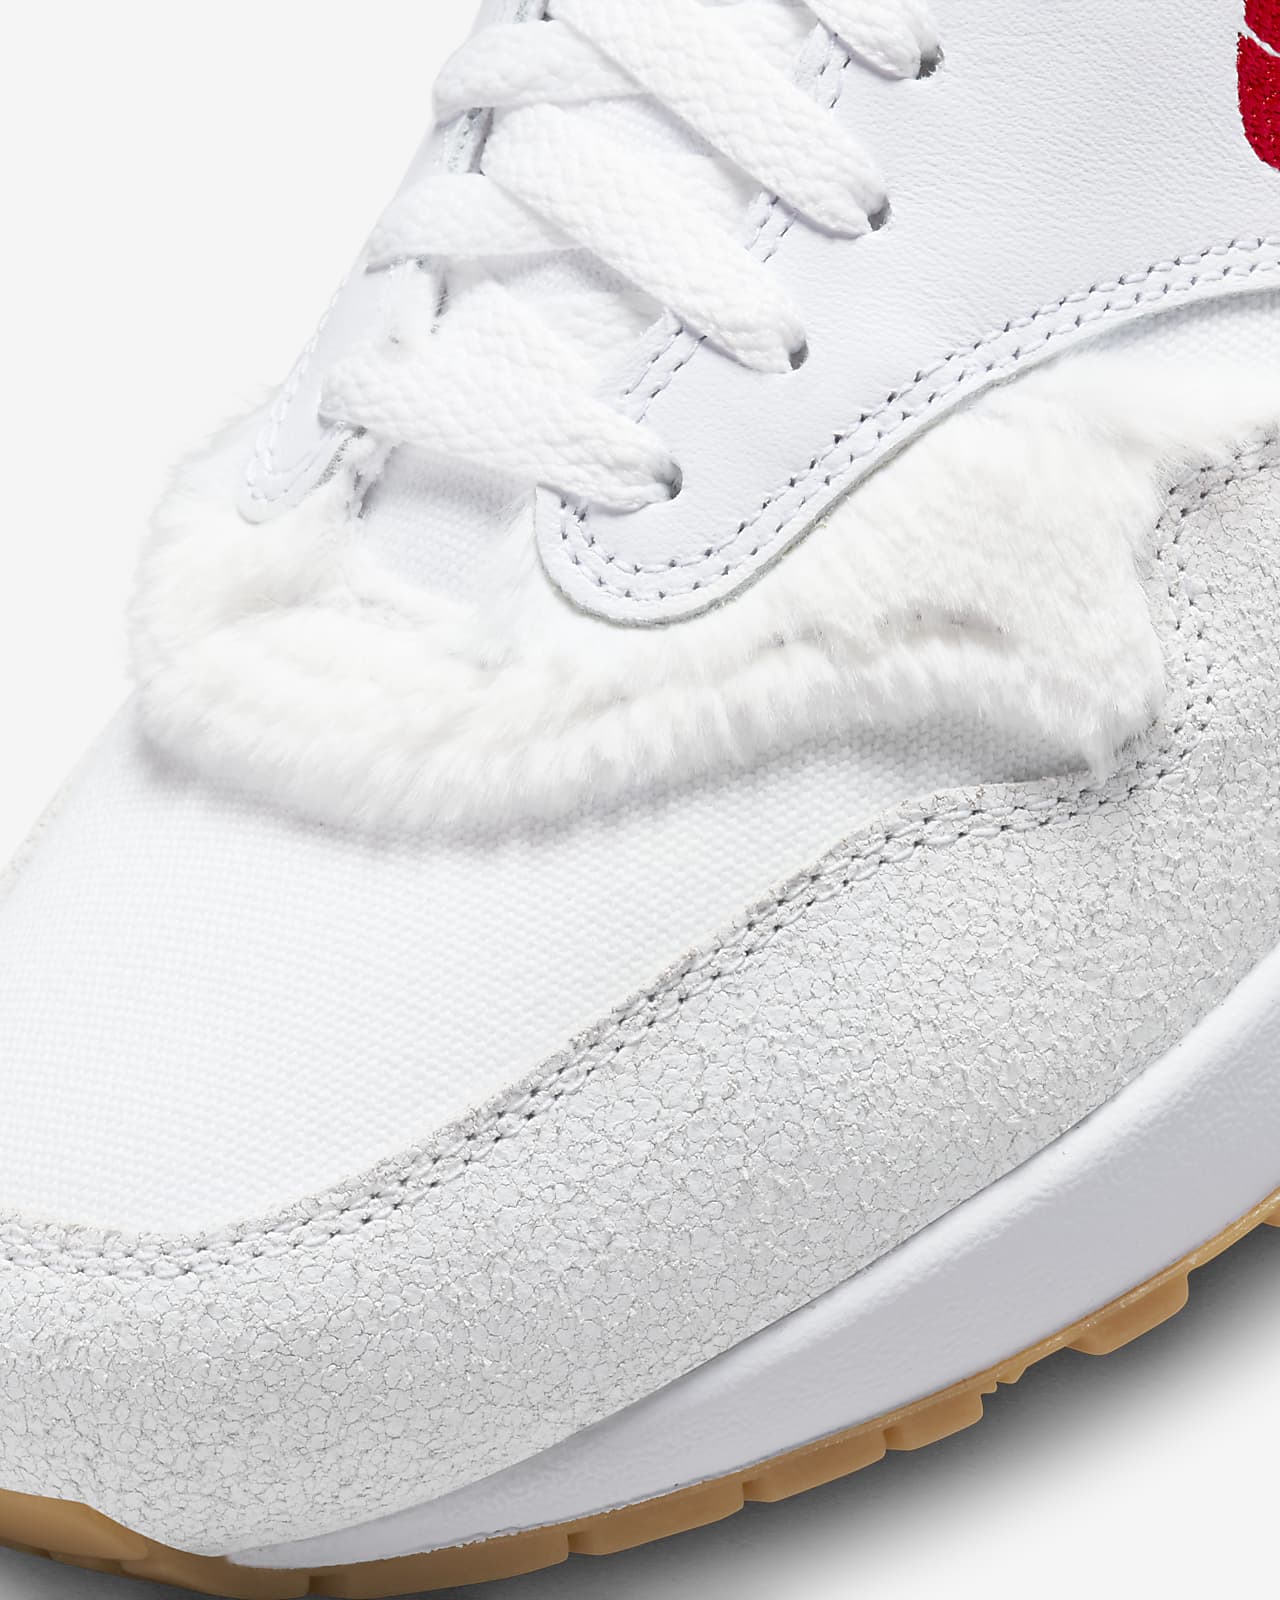 The Nike Air Max 1 Premium The Bay will be available online